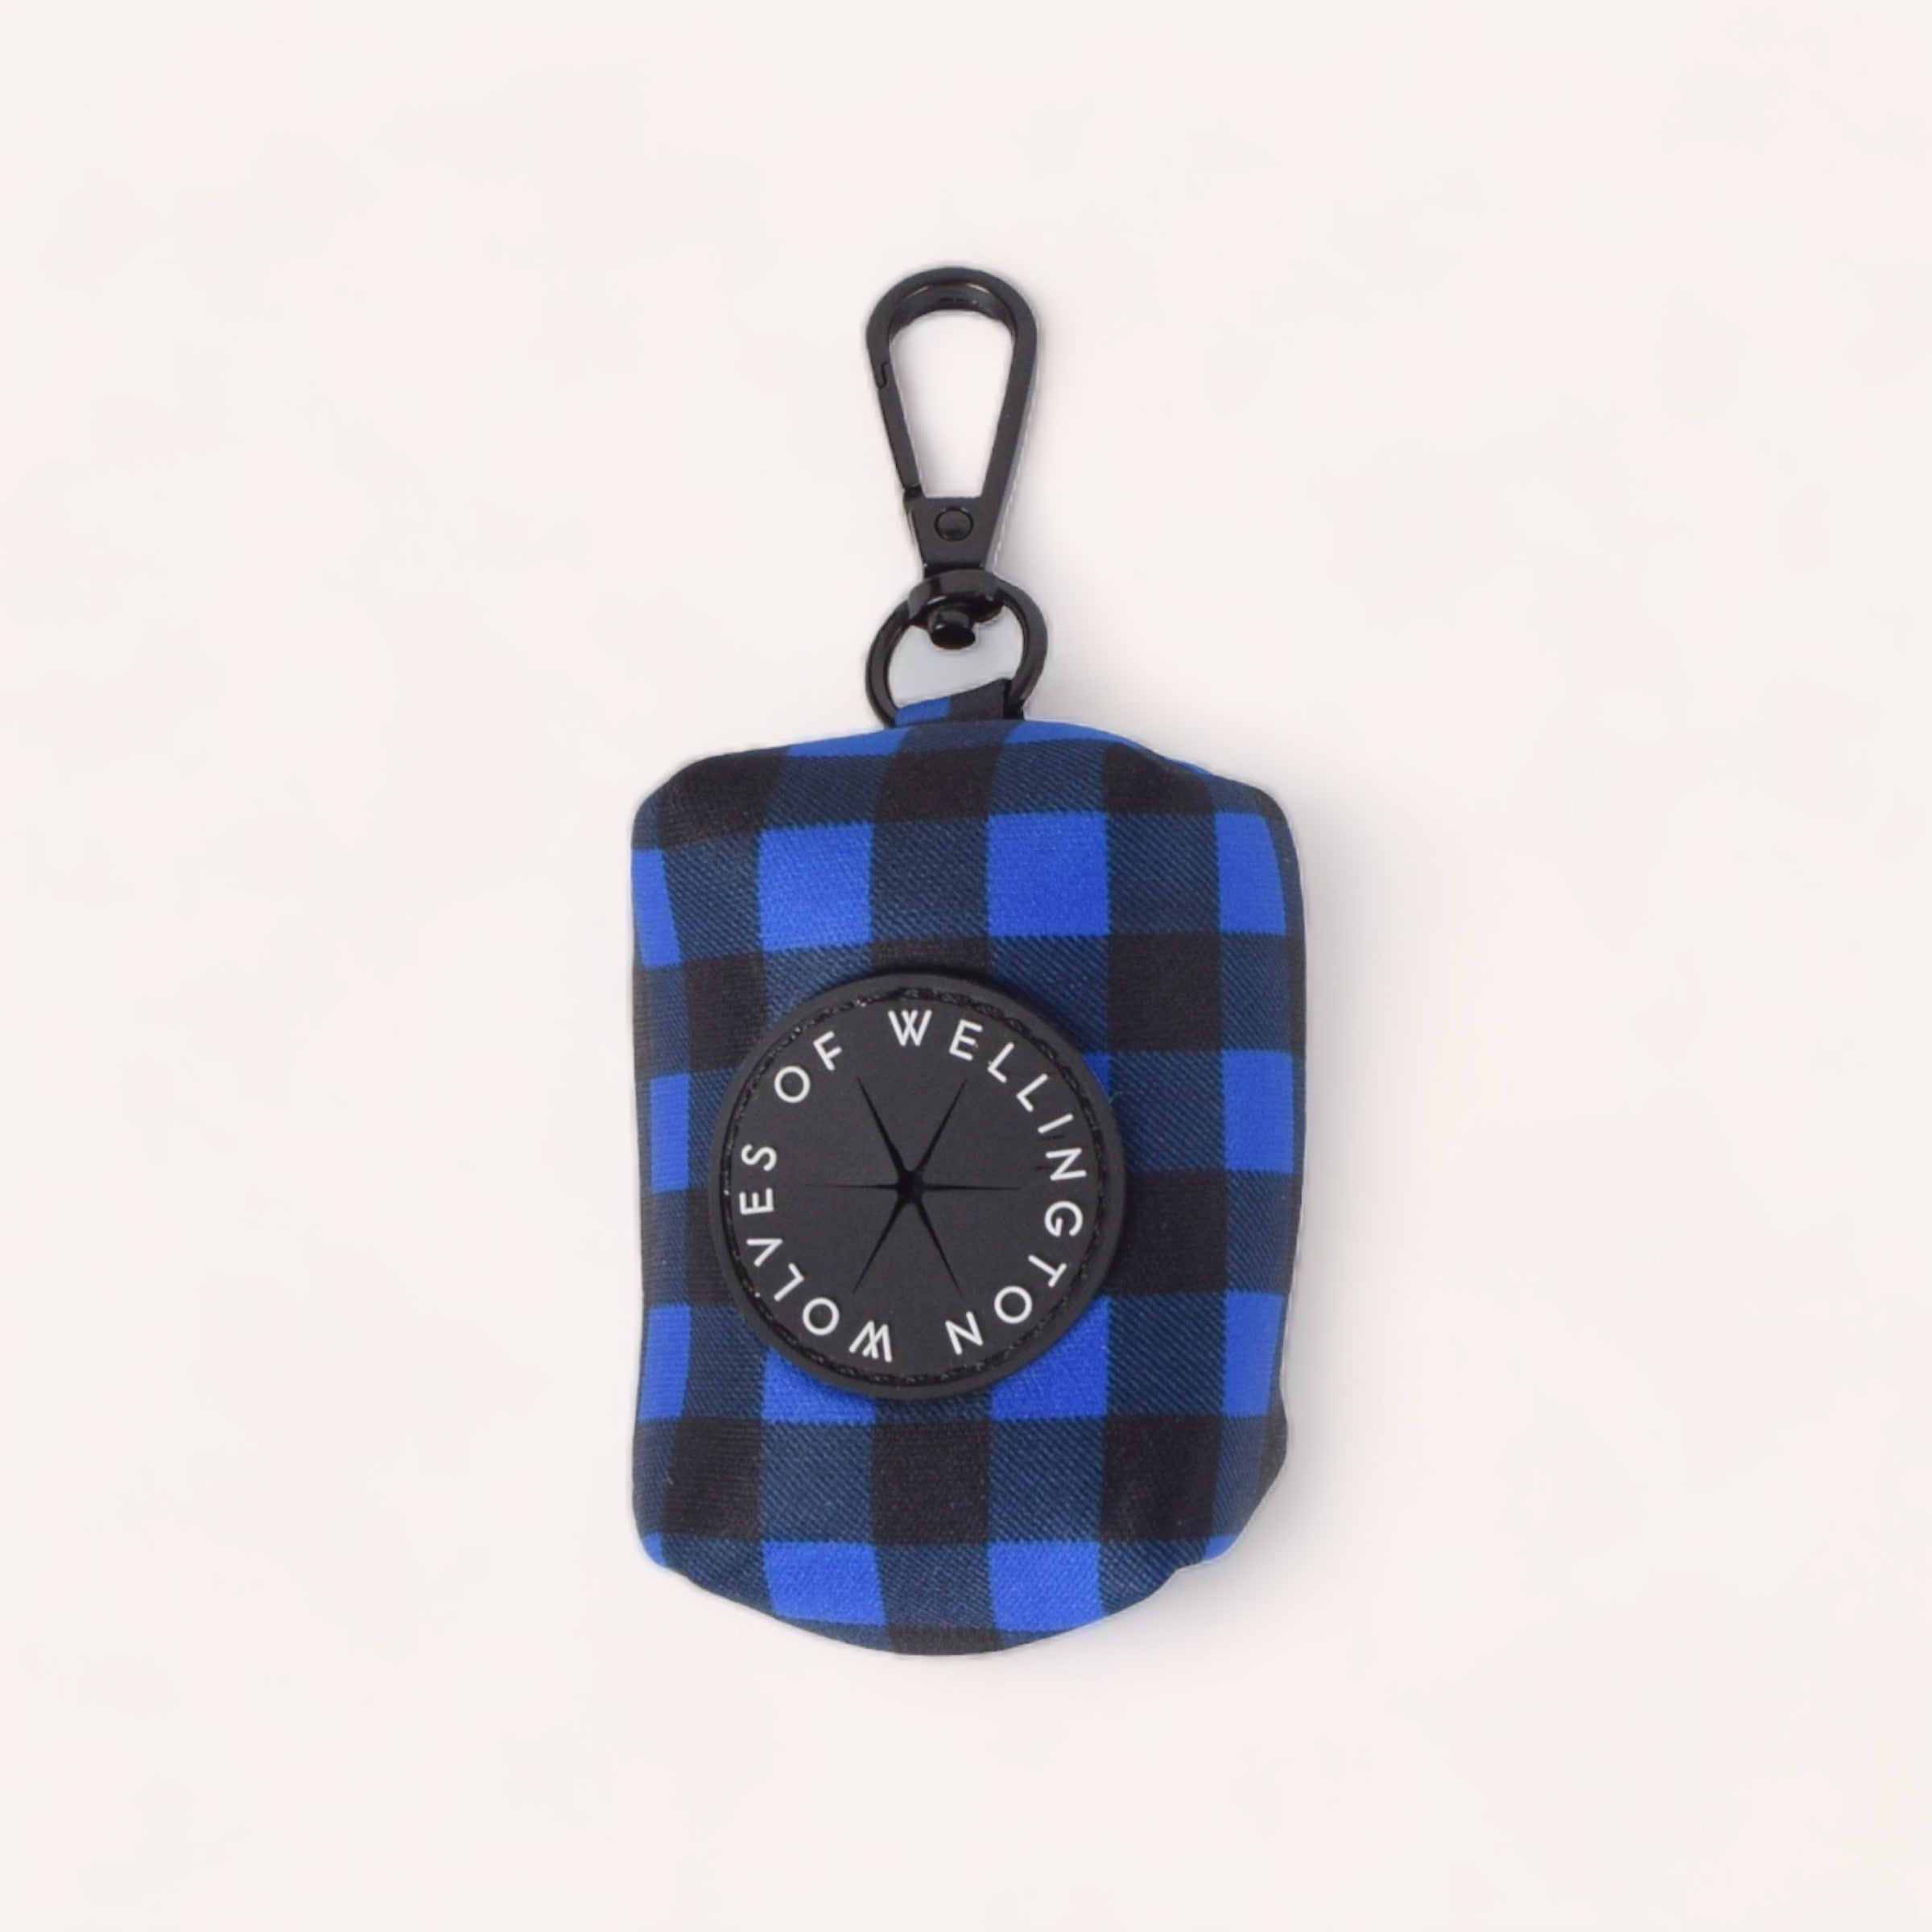 A portable Luey Poop Pouch by Wolves of Wellington with a zipper and a circular logo in the center, designed to attach to a dog lead, comes with spaces for your essentials and dog poop bags.